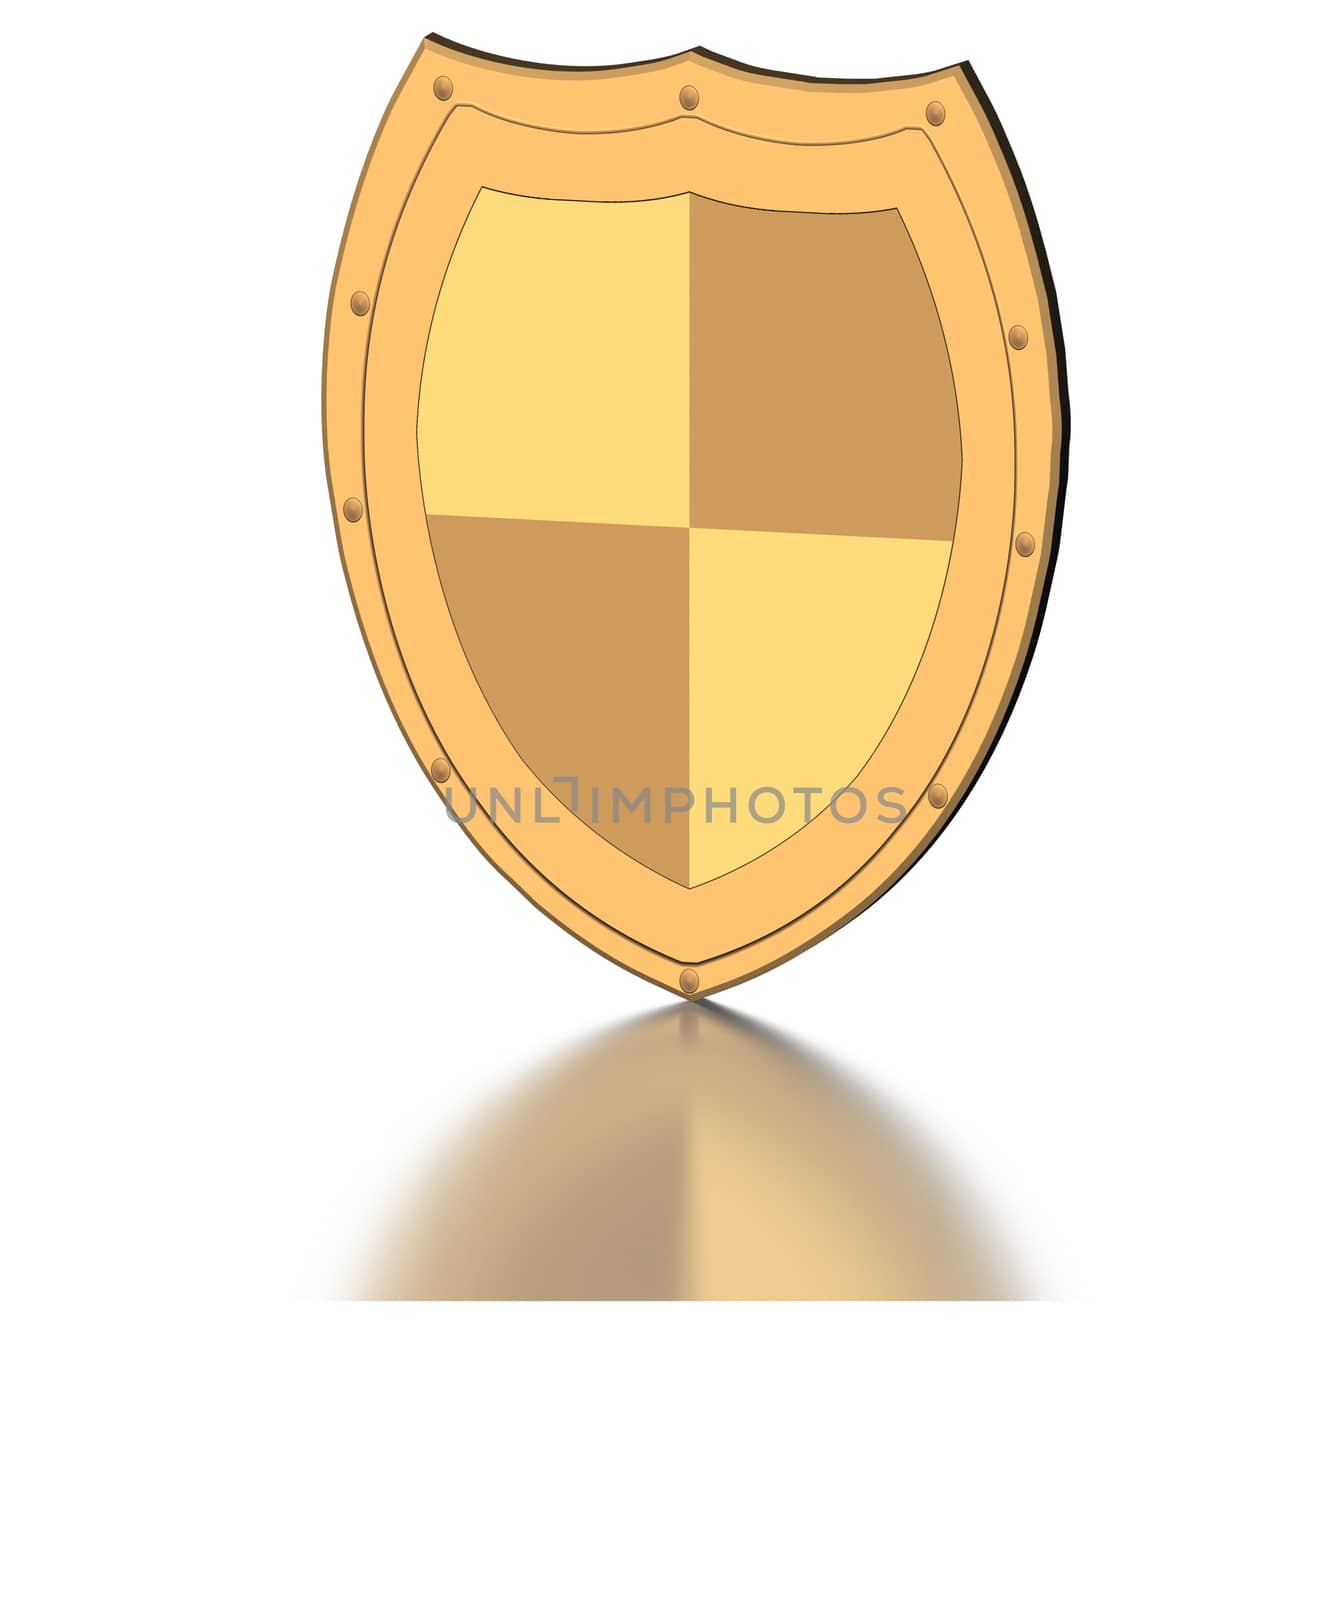 Image of a sheild, as concept of information security and protection of communications